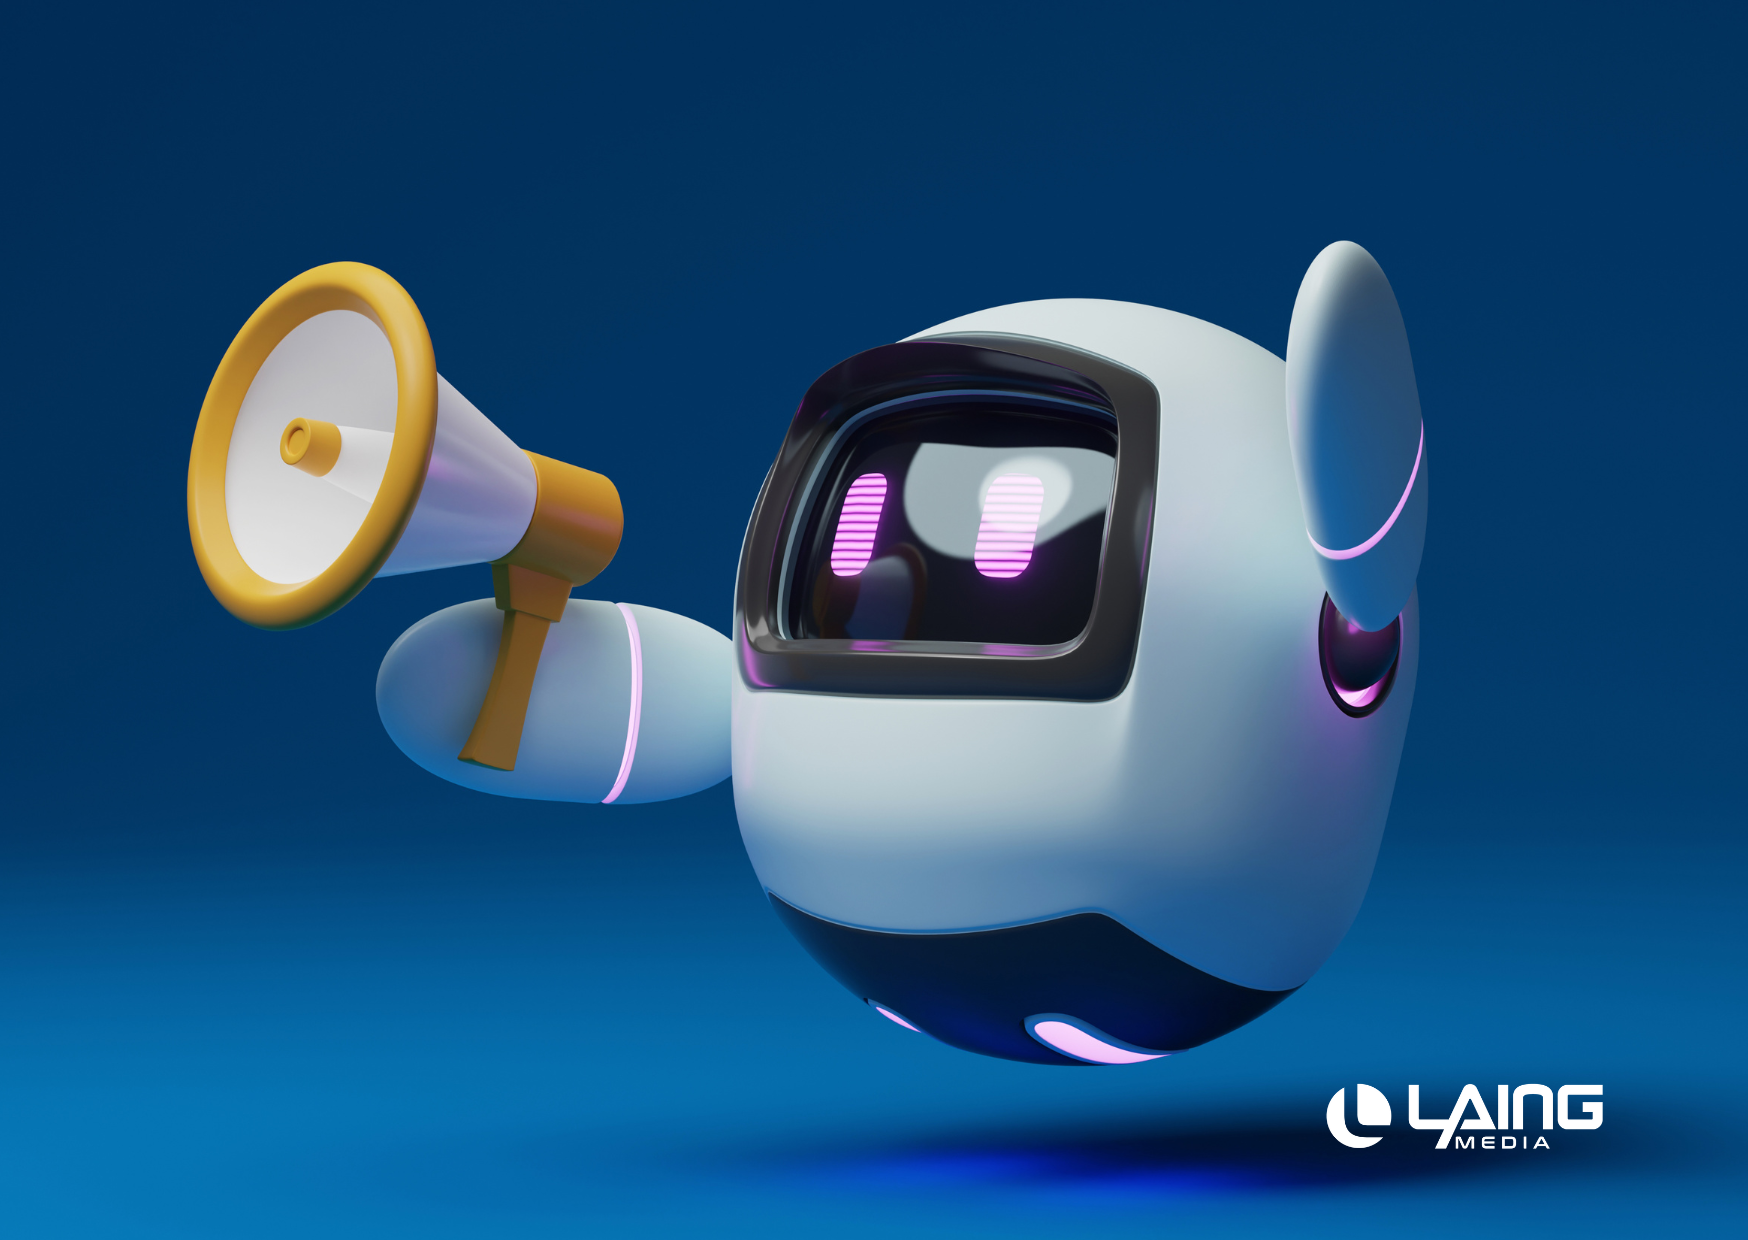 An AI robot with a megaphone and a white Laing media logo on the bottom.